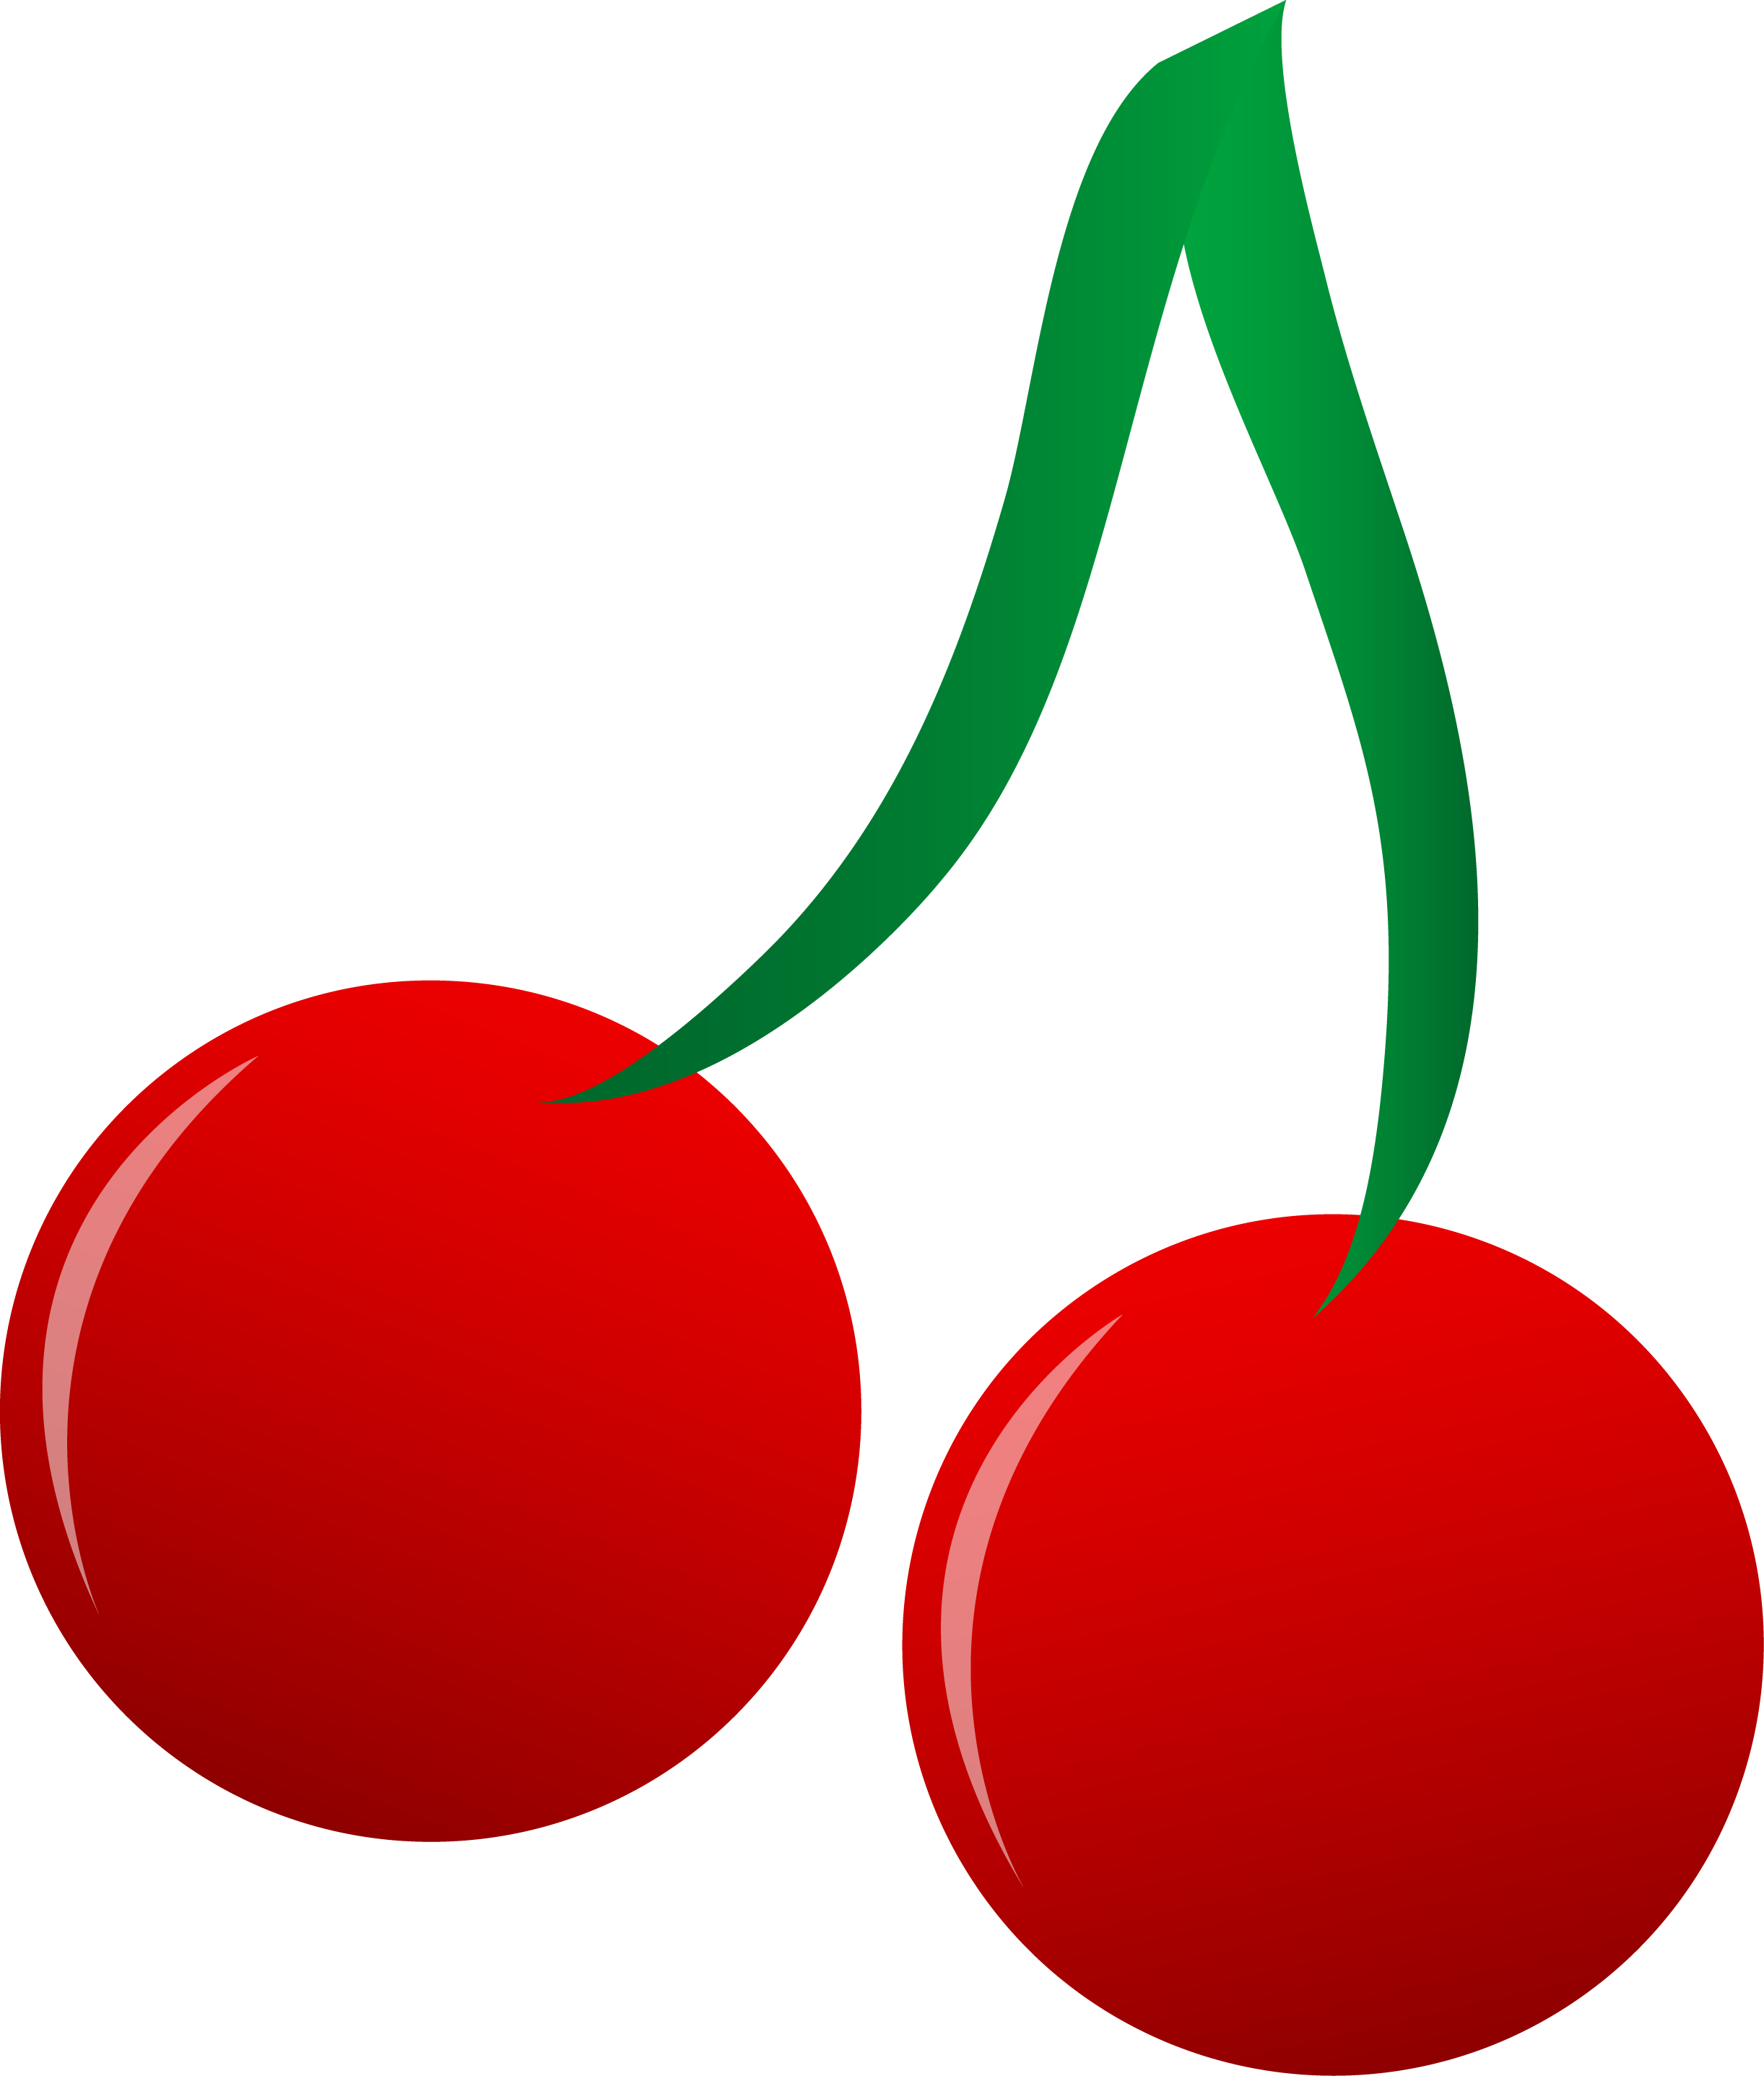 Red Cherries Drawing Free Image Download 8012